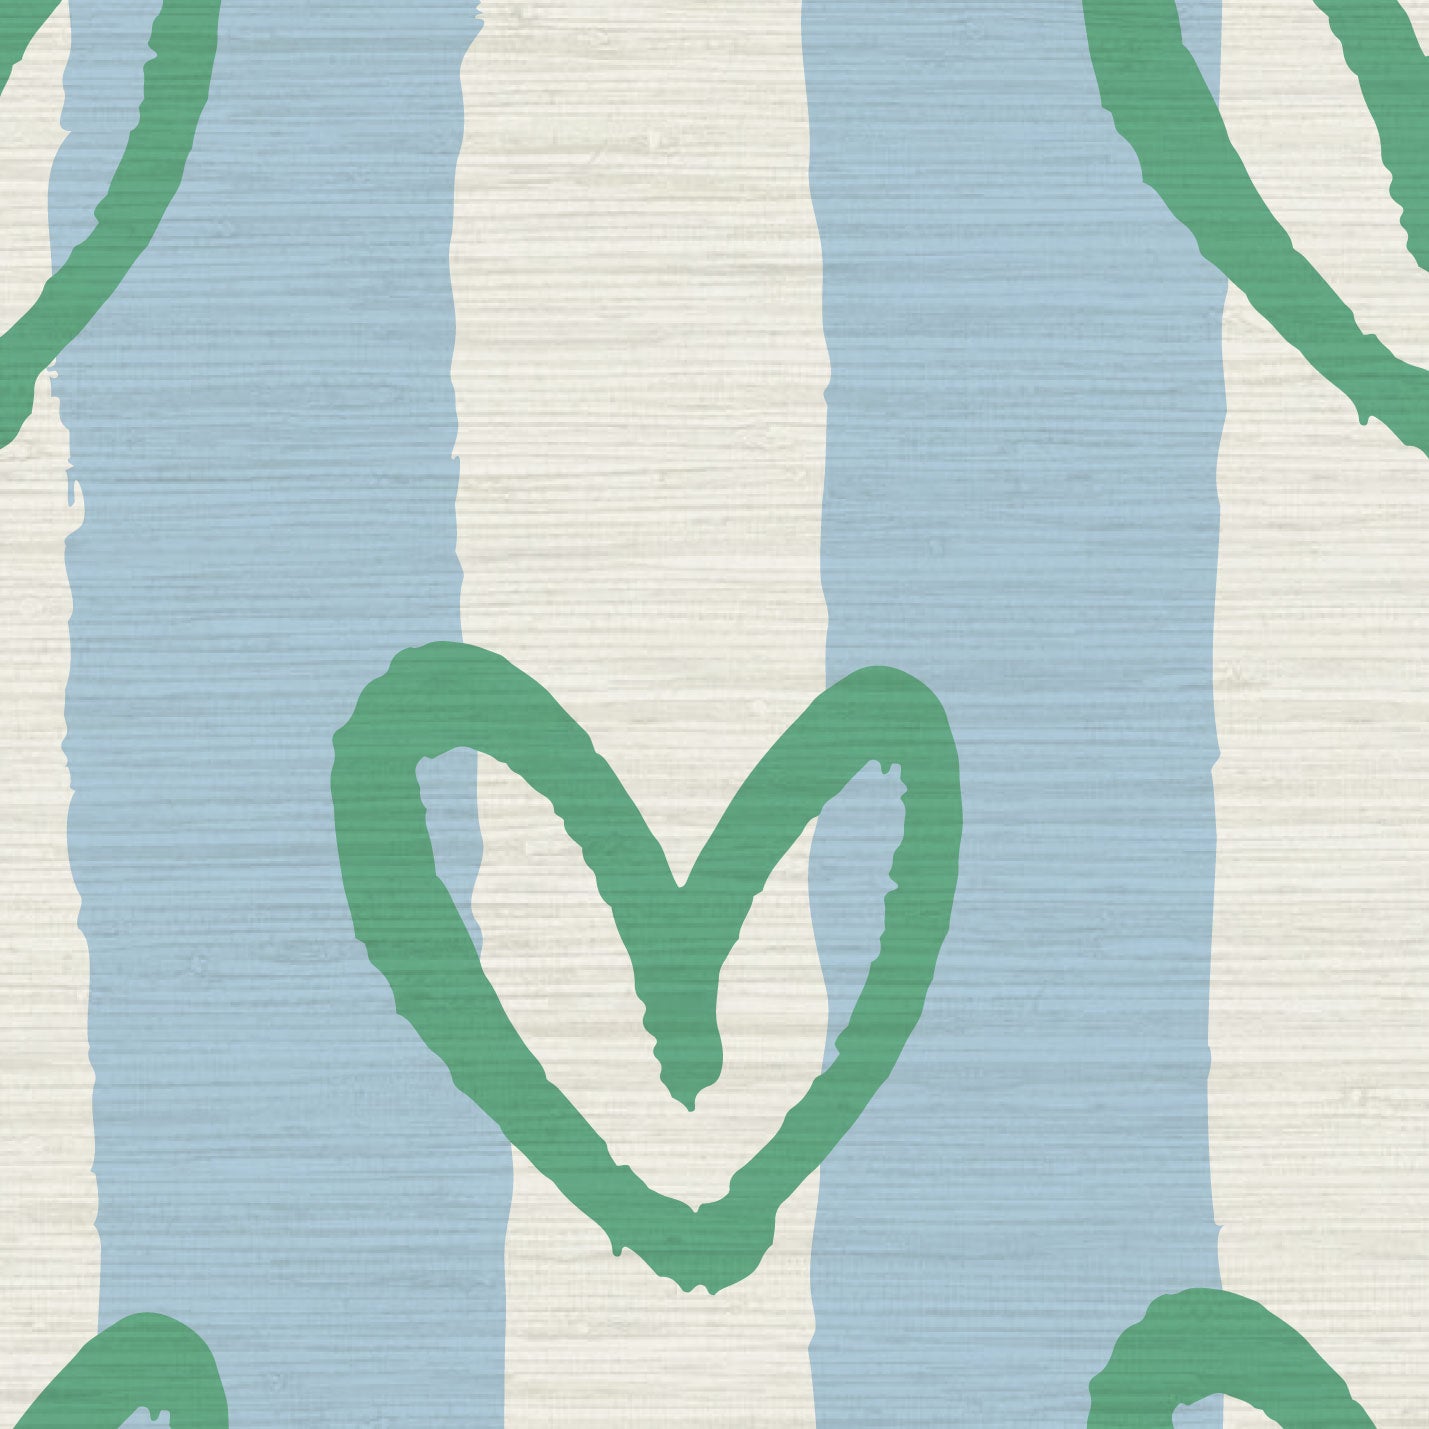 Load image into Gallery viewer, hearts vertical wide stripes house of shan collaboration kids playroom nursery Grasscloth wallpaper Natural Textured Eco-Friendly Non-toxic High-quality Sustainable Interior Design Bold Custom Tailor-made Retro chic Bold fun french blue white green living room nursery kids bedroom
